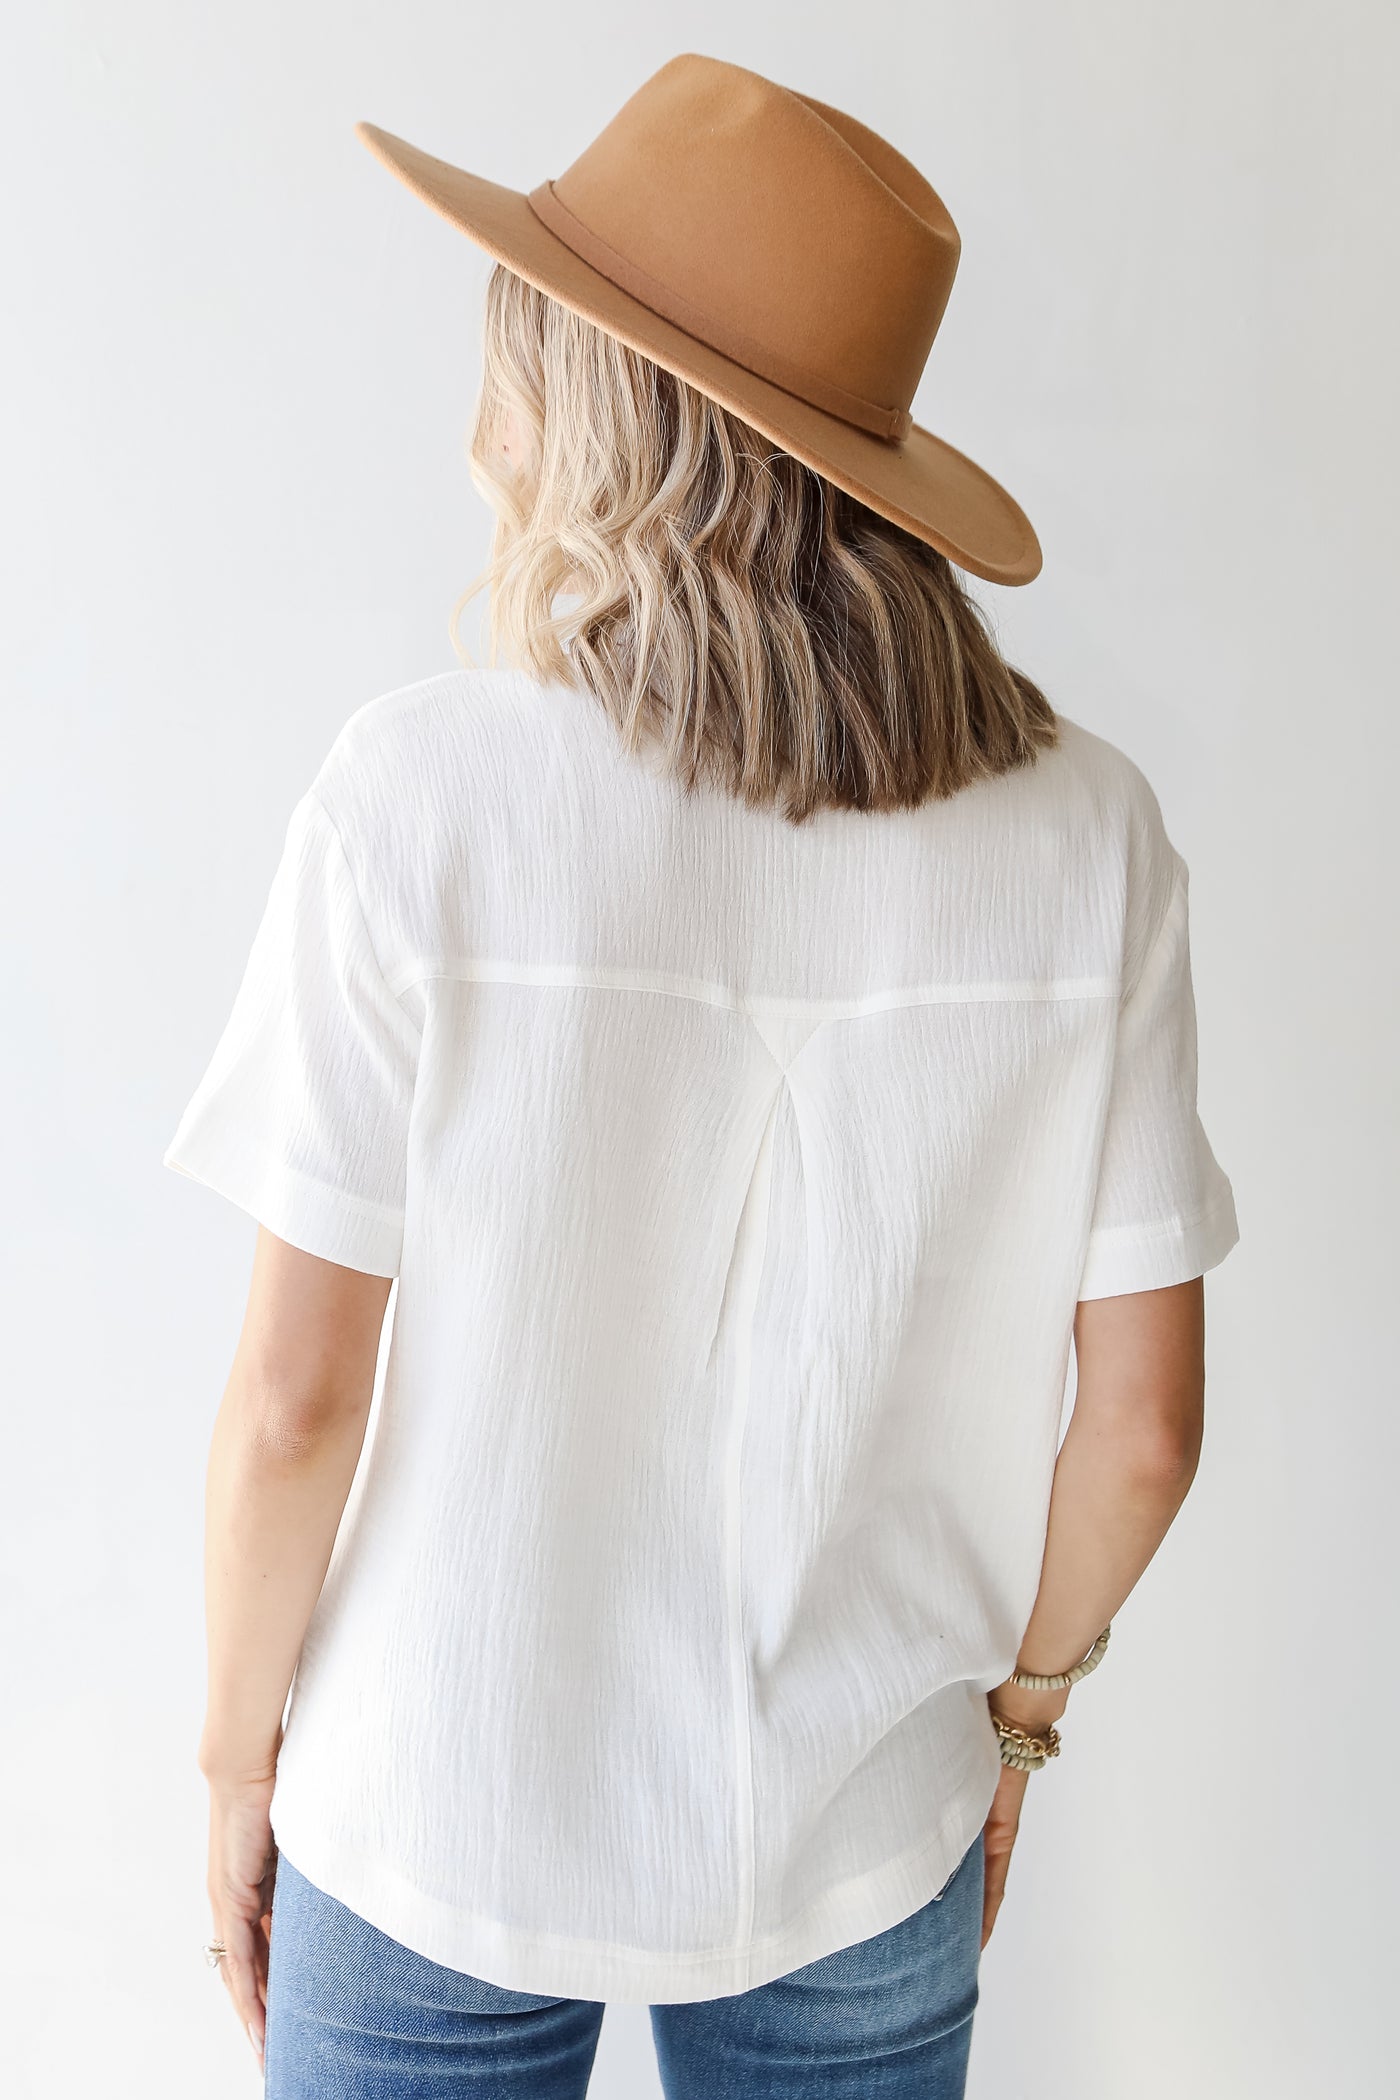 Linen Button-Up Blouse in white back view